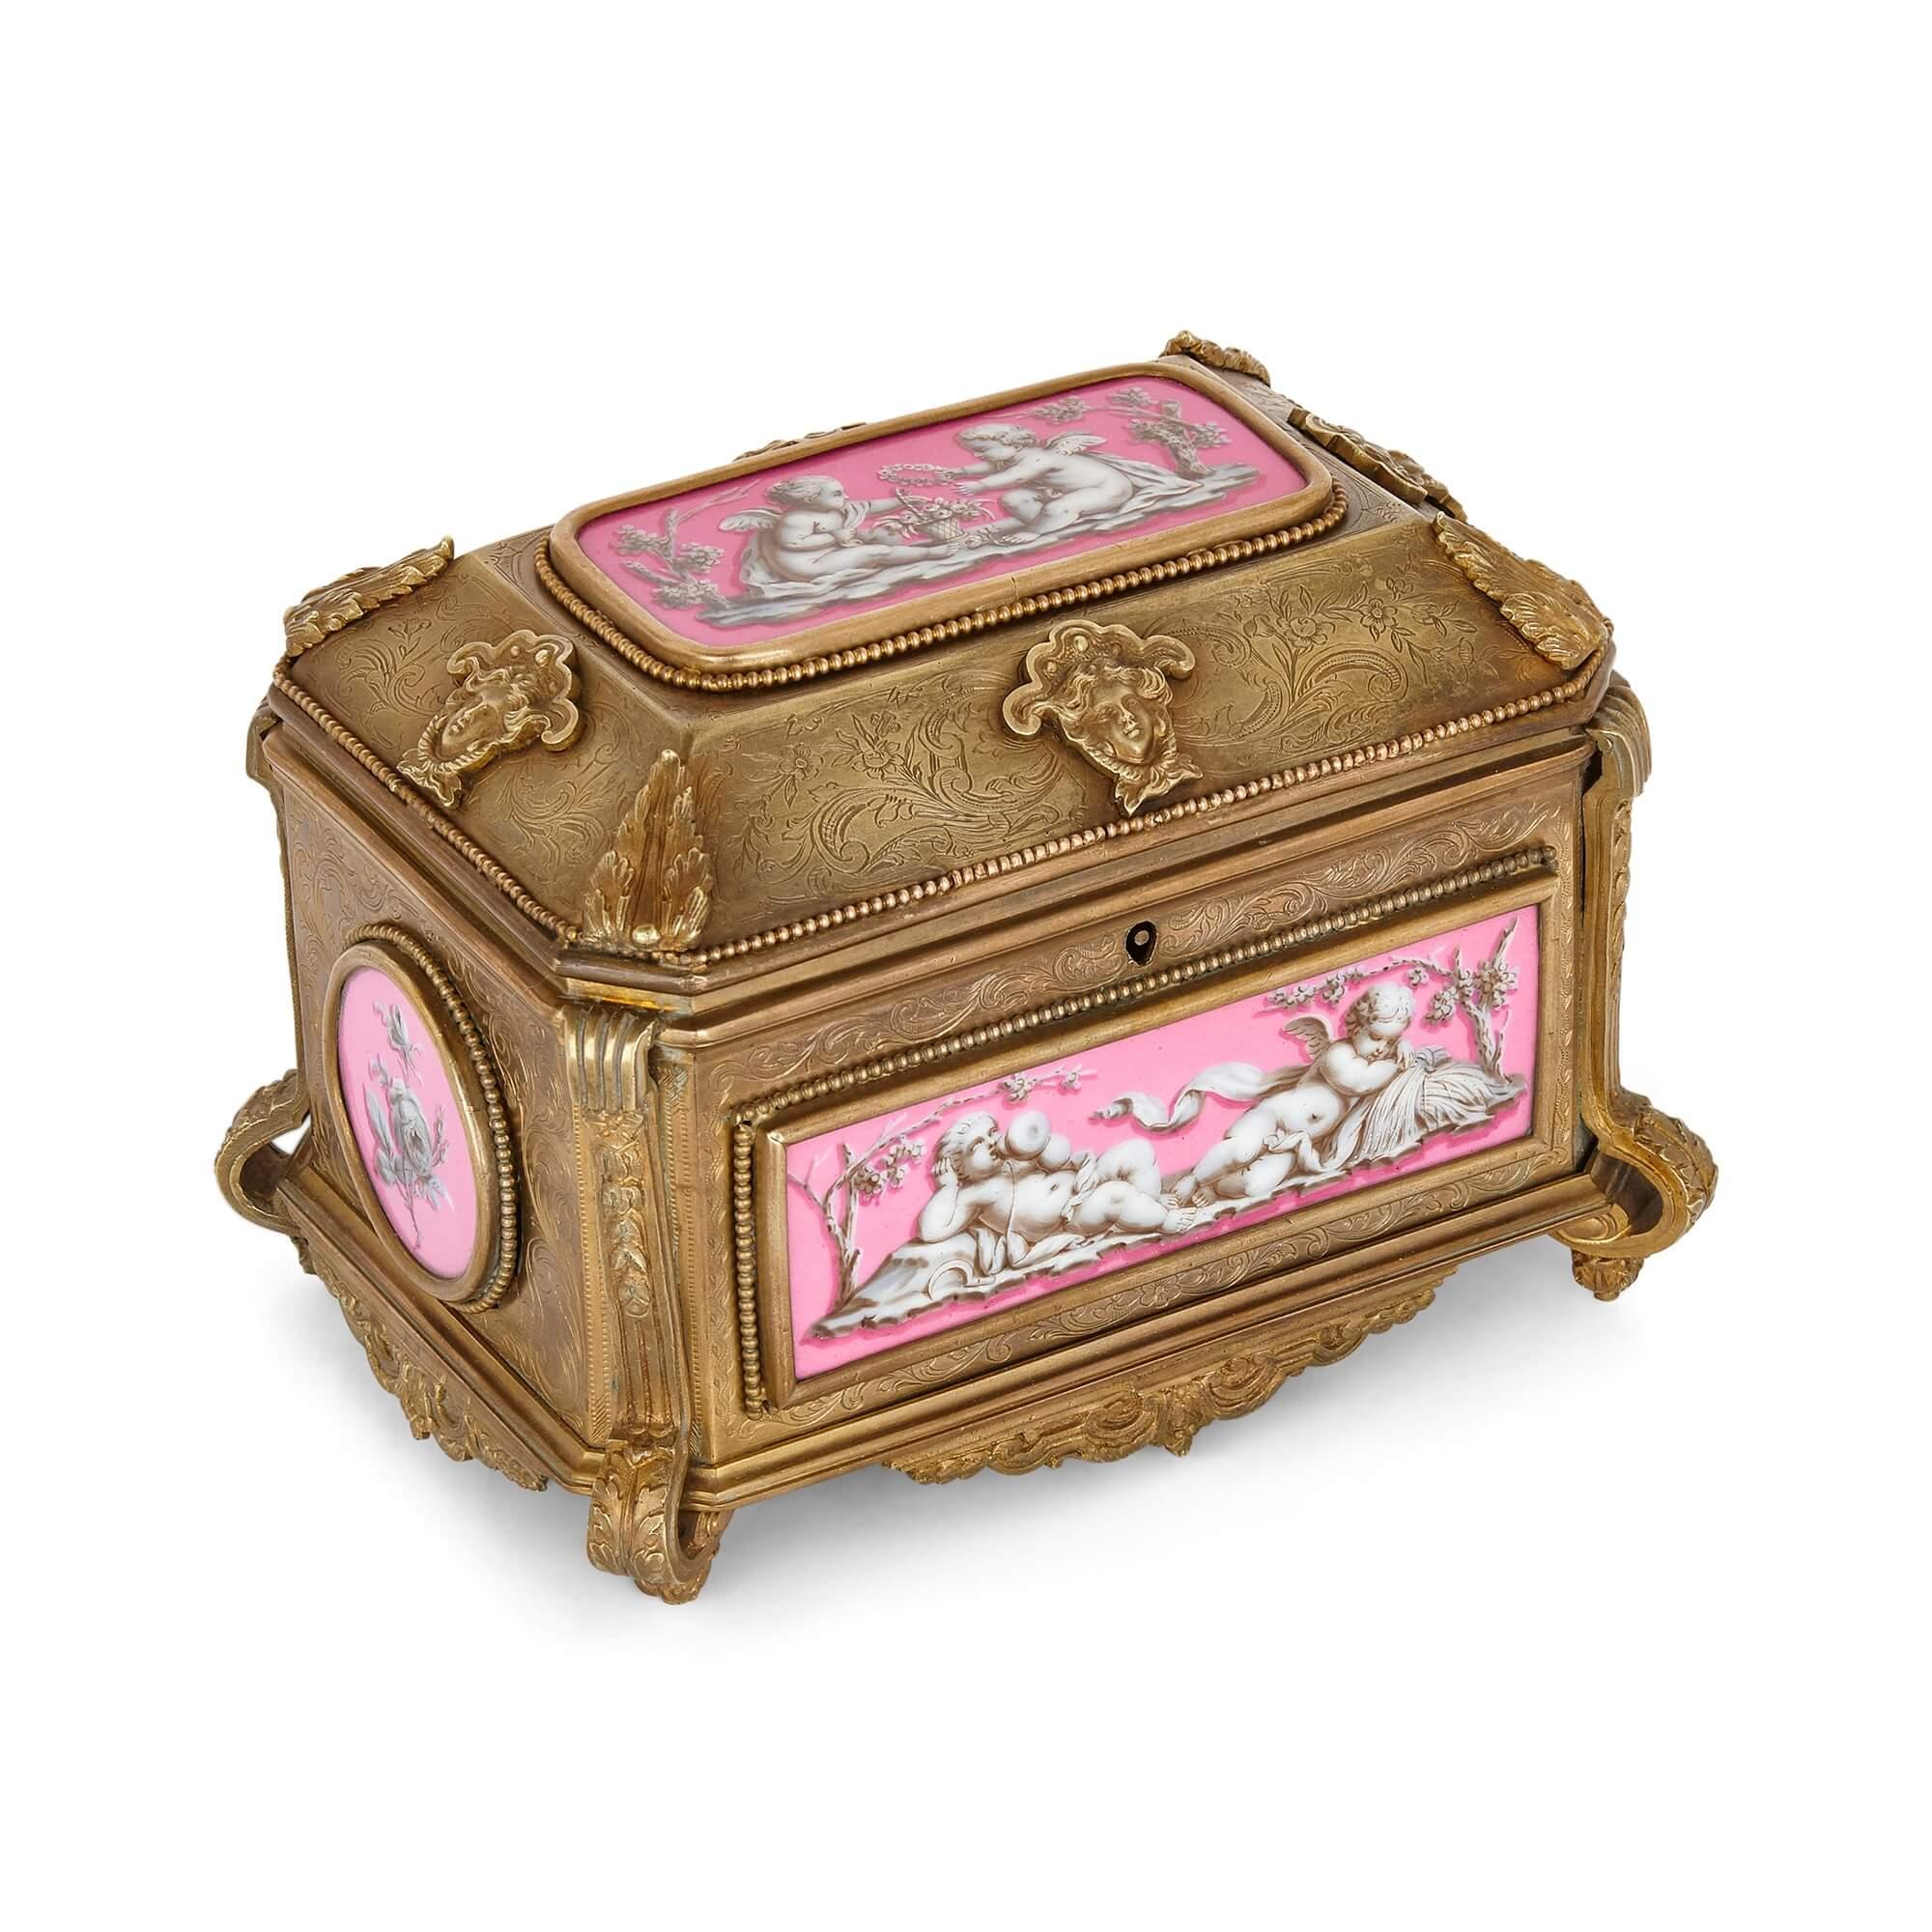 French gilt bronze and pink porcelain jewellery box by Tahan.
French, late 19th Century
Measures: height 13cm, width 18cm, depth 13cm.

This fine jewellery casket by the French maker Tahan is crafted from porcelain and gilt bronze. The casket